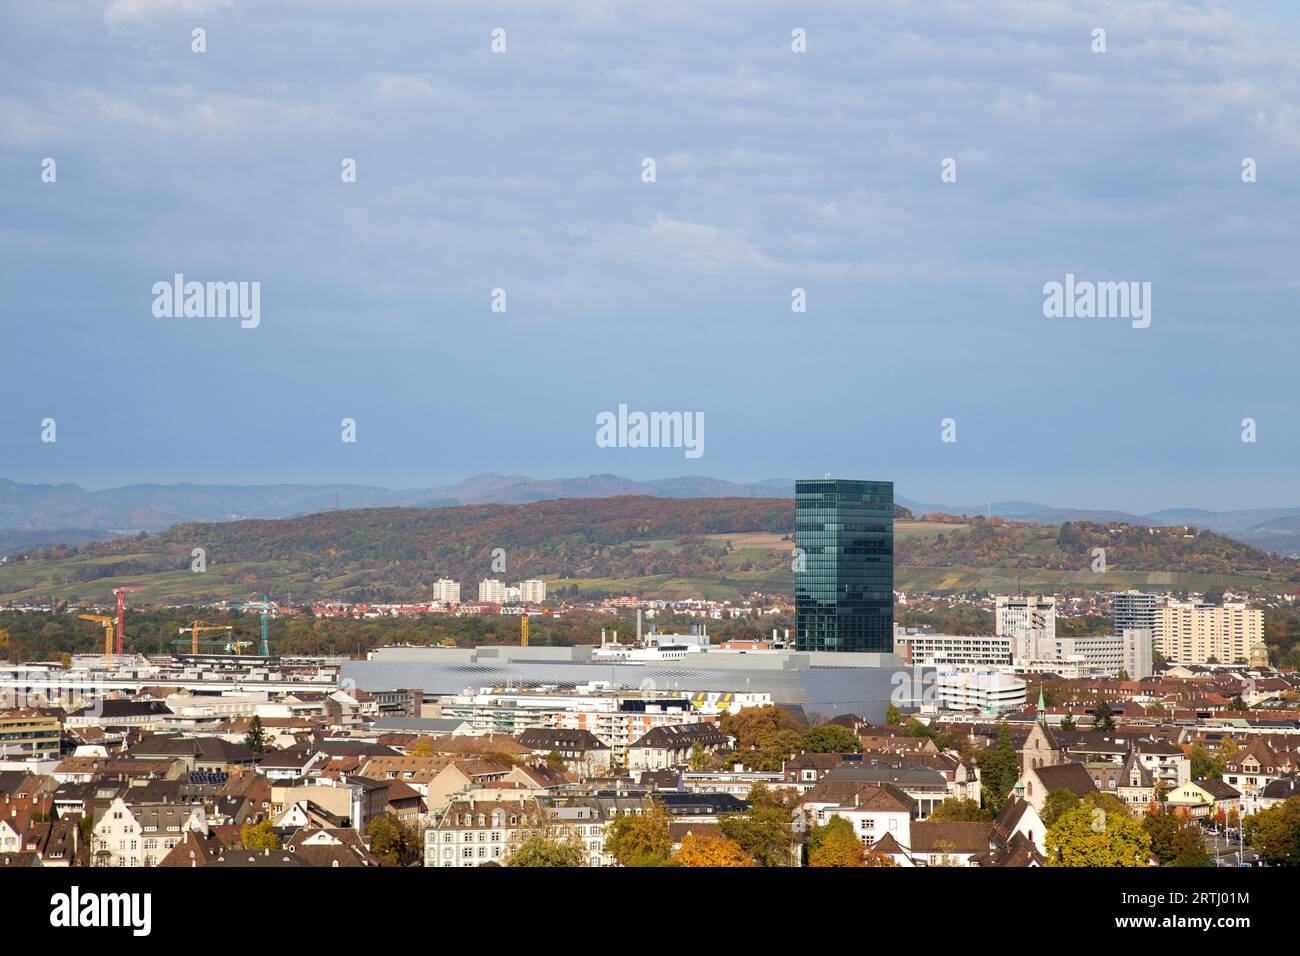 Basel, Switzerland, October 24, 2016: Aerial view of the exhibition center and its tower Stock Photo